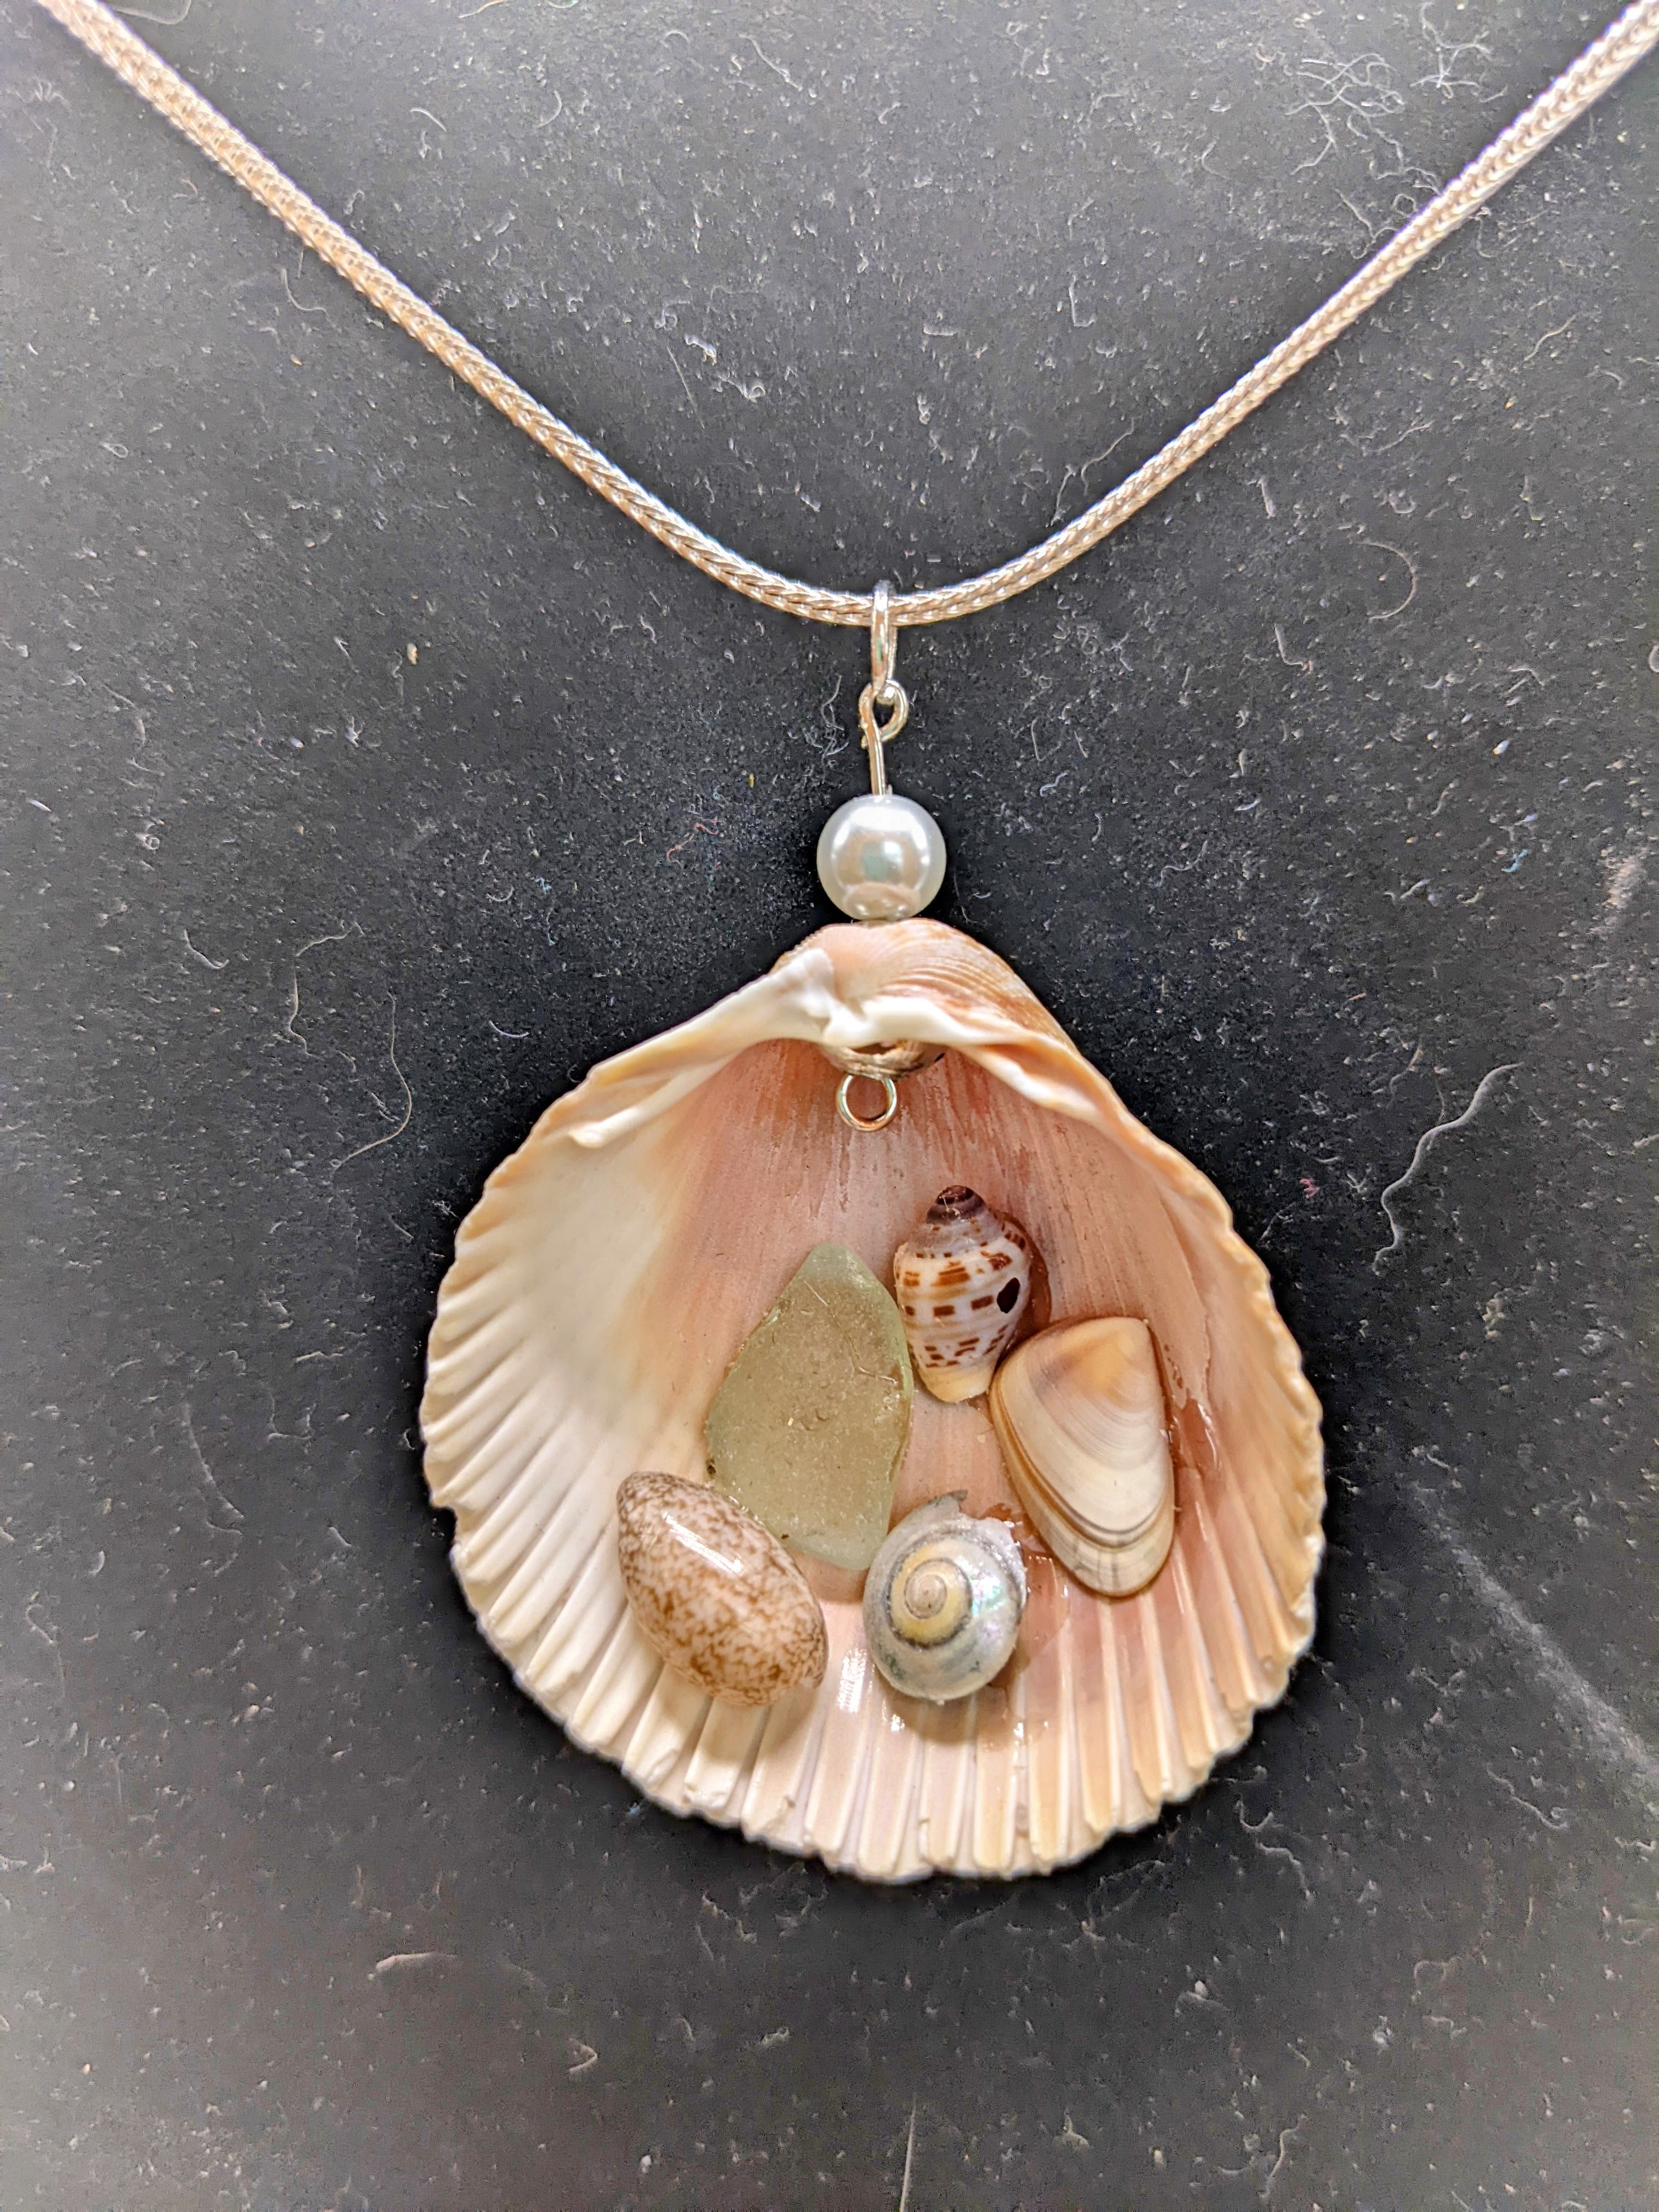 Prickly Cockle shell and seaglass necklace #3